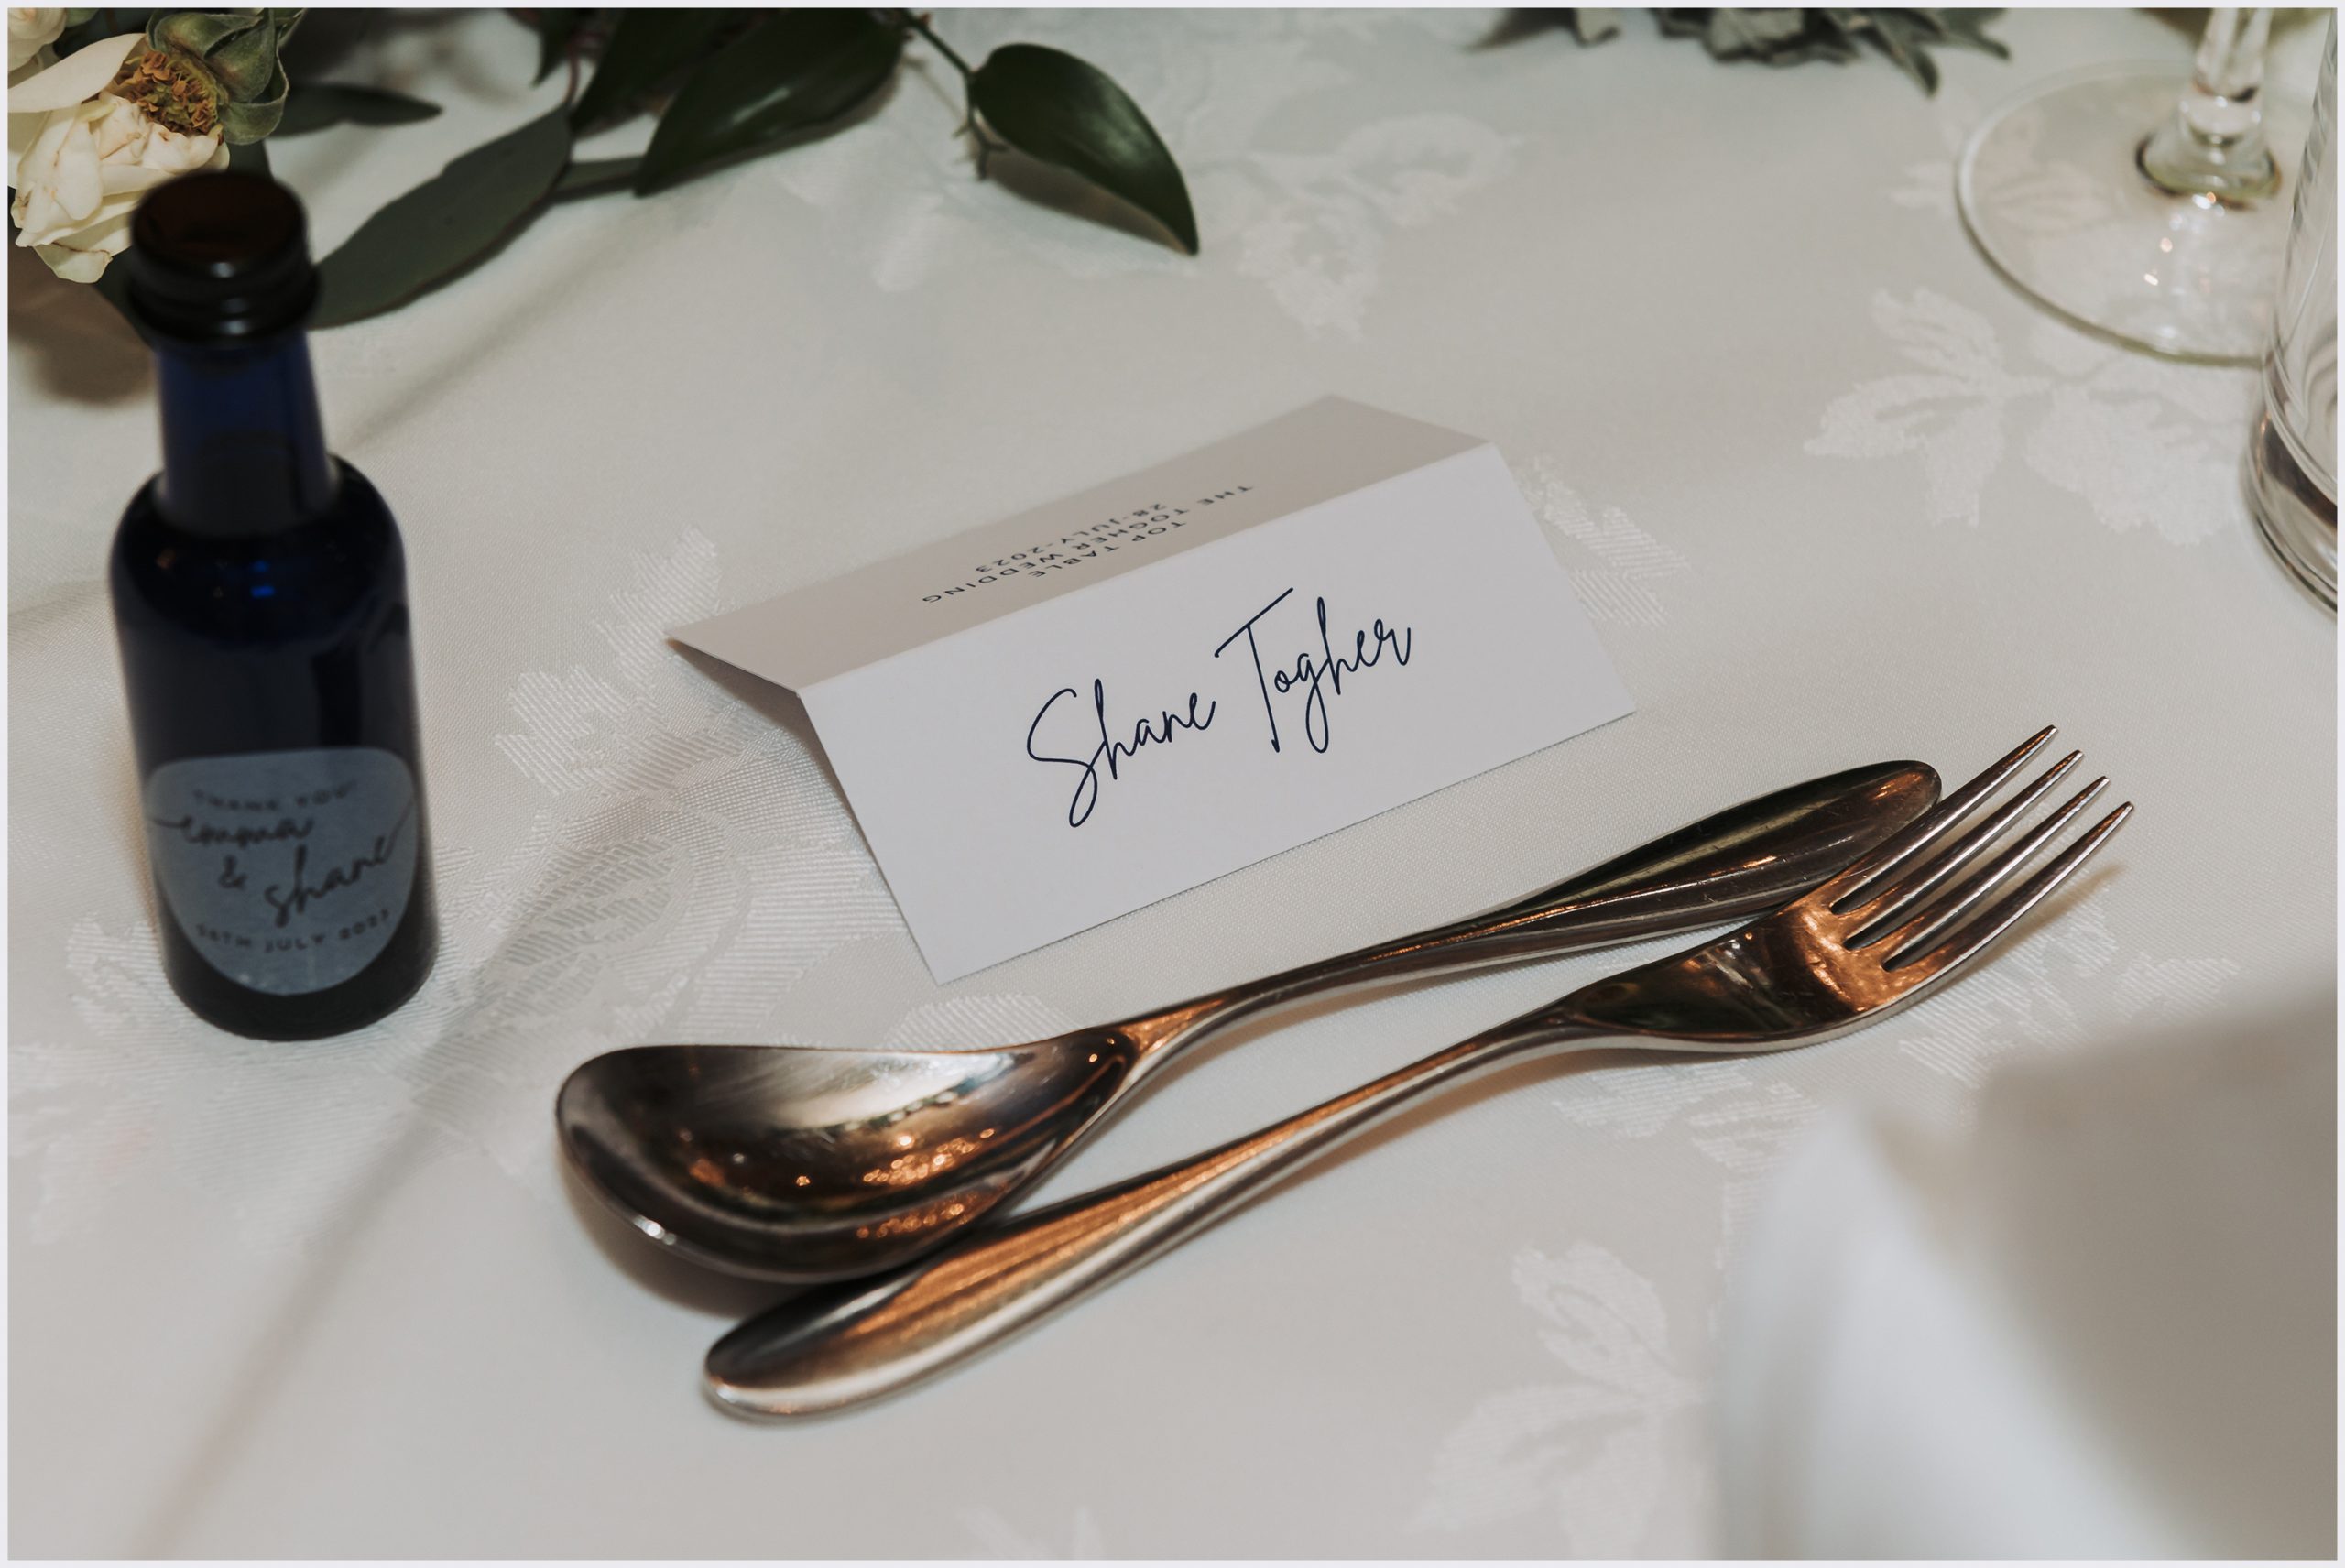 The groom's wedding breakfast place setting at The Grosvenor Pulford Hotel and Spa